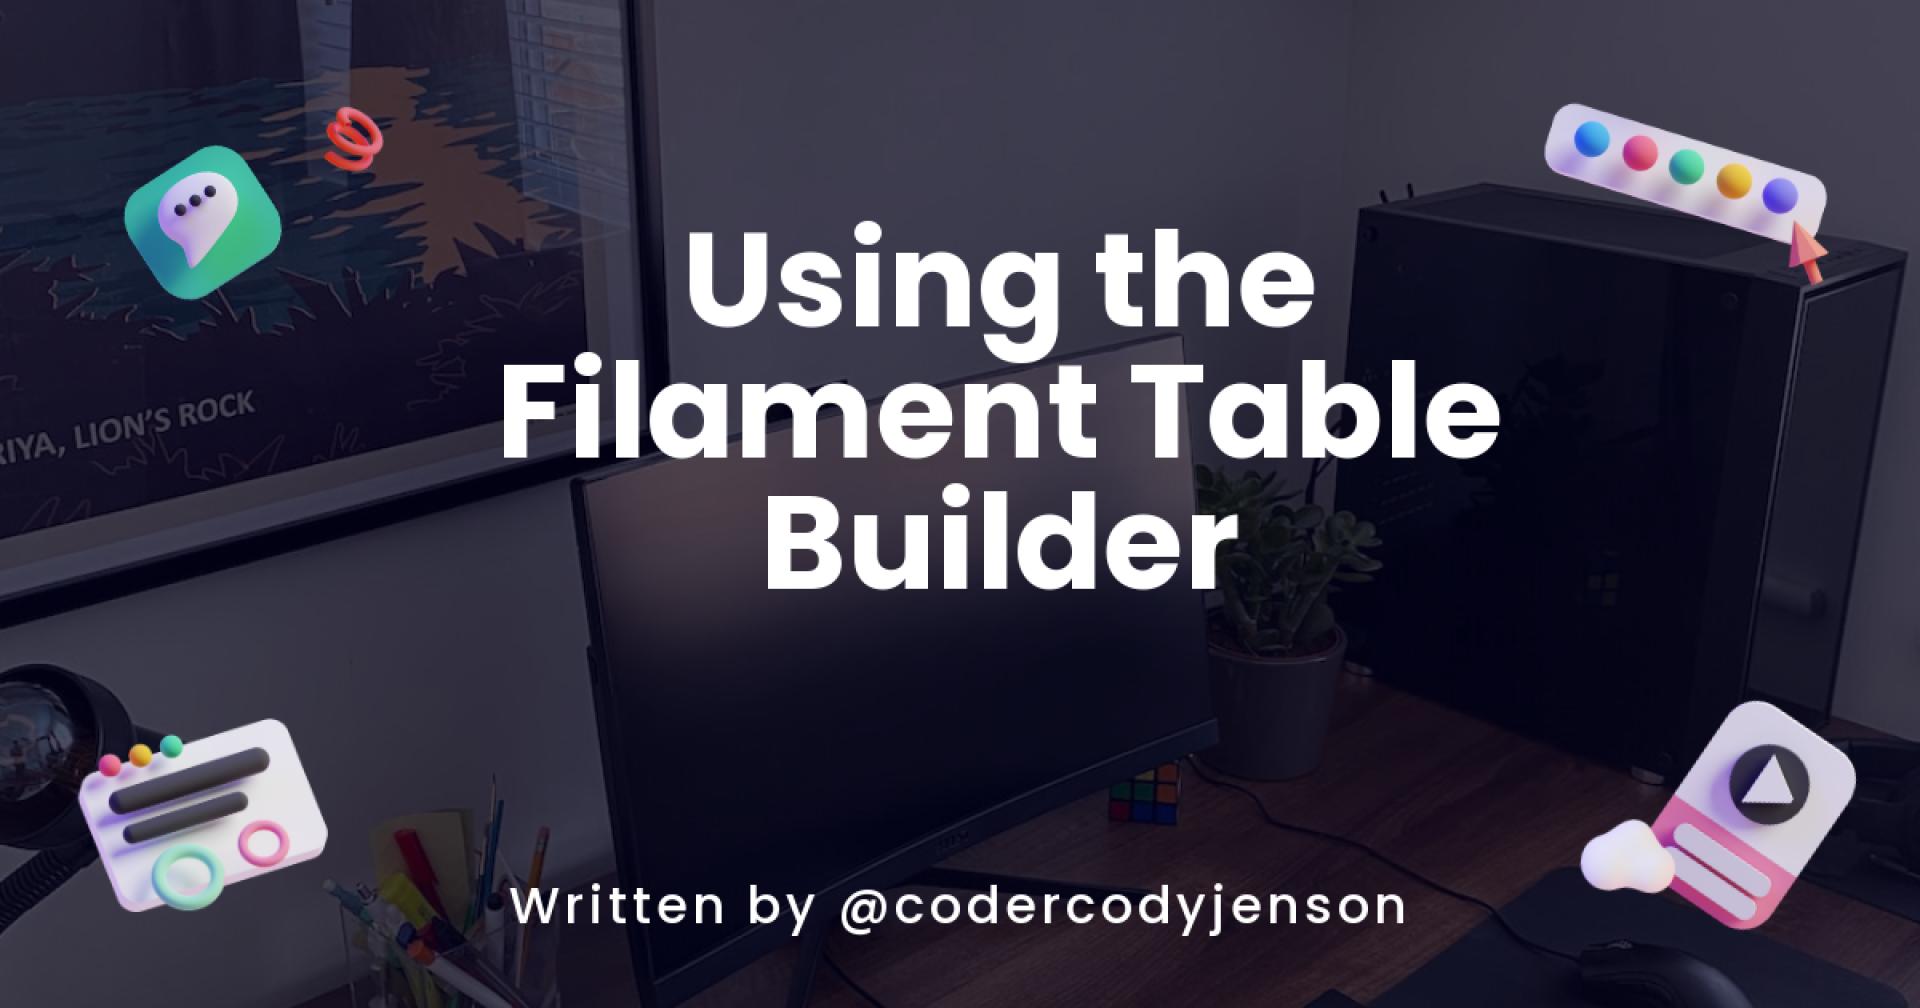 Using the Filament Table Builder